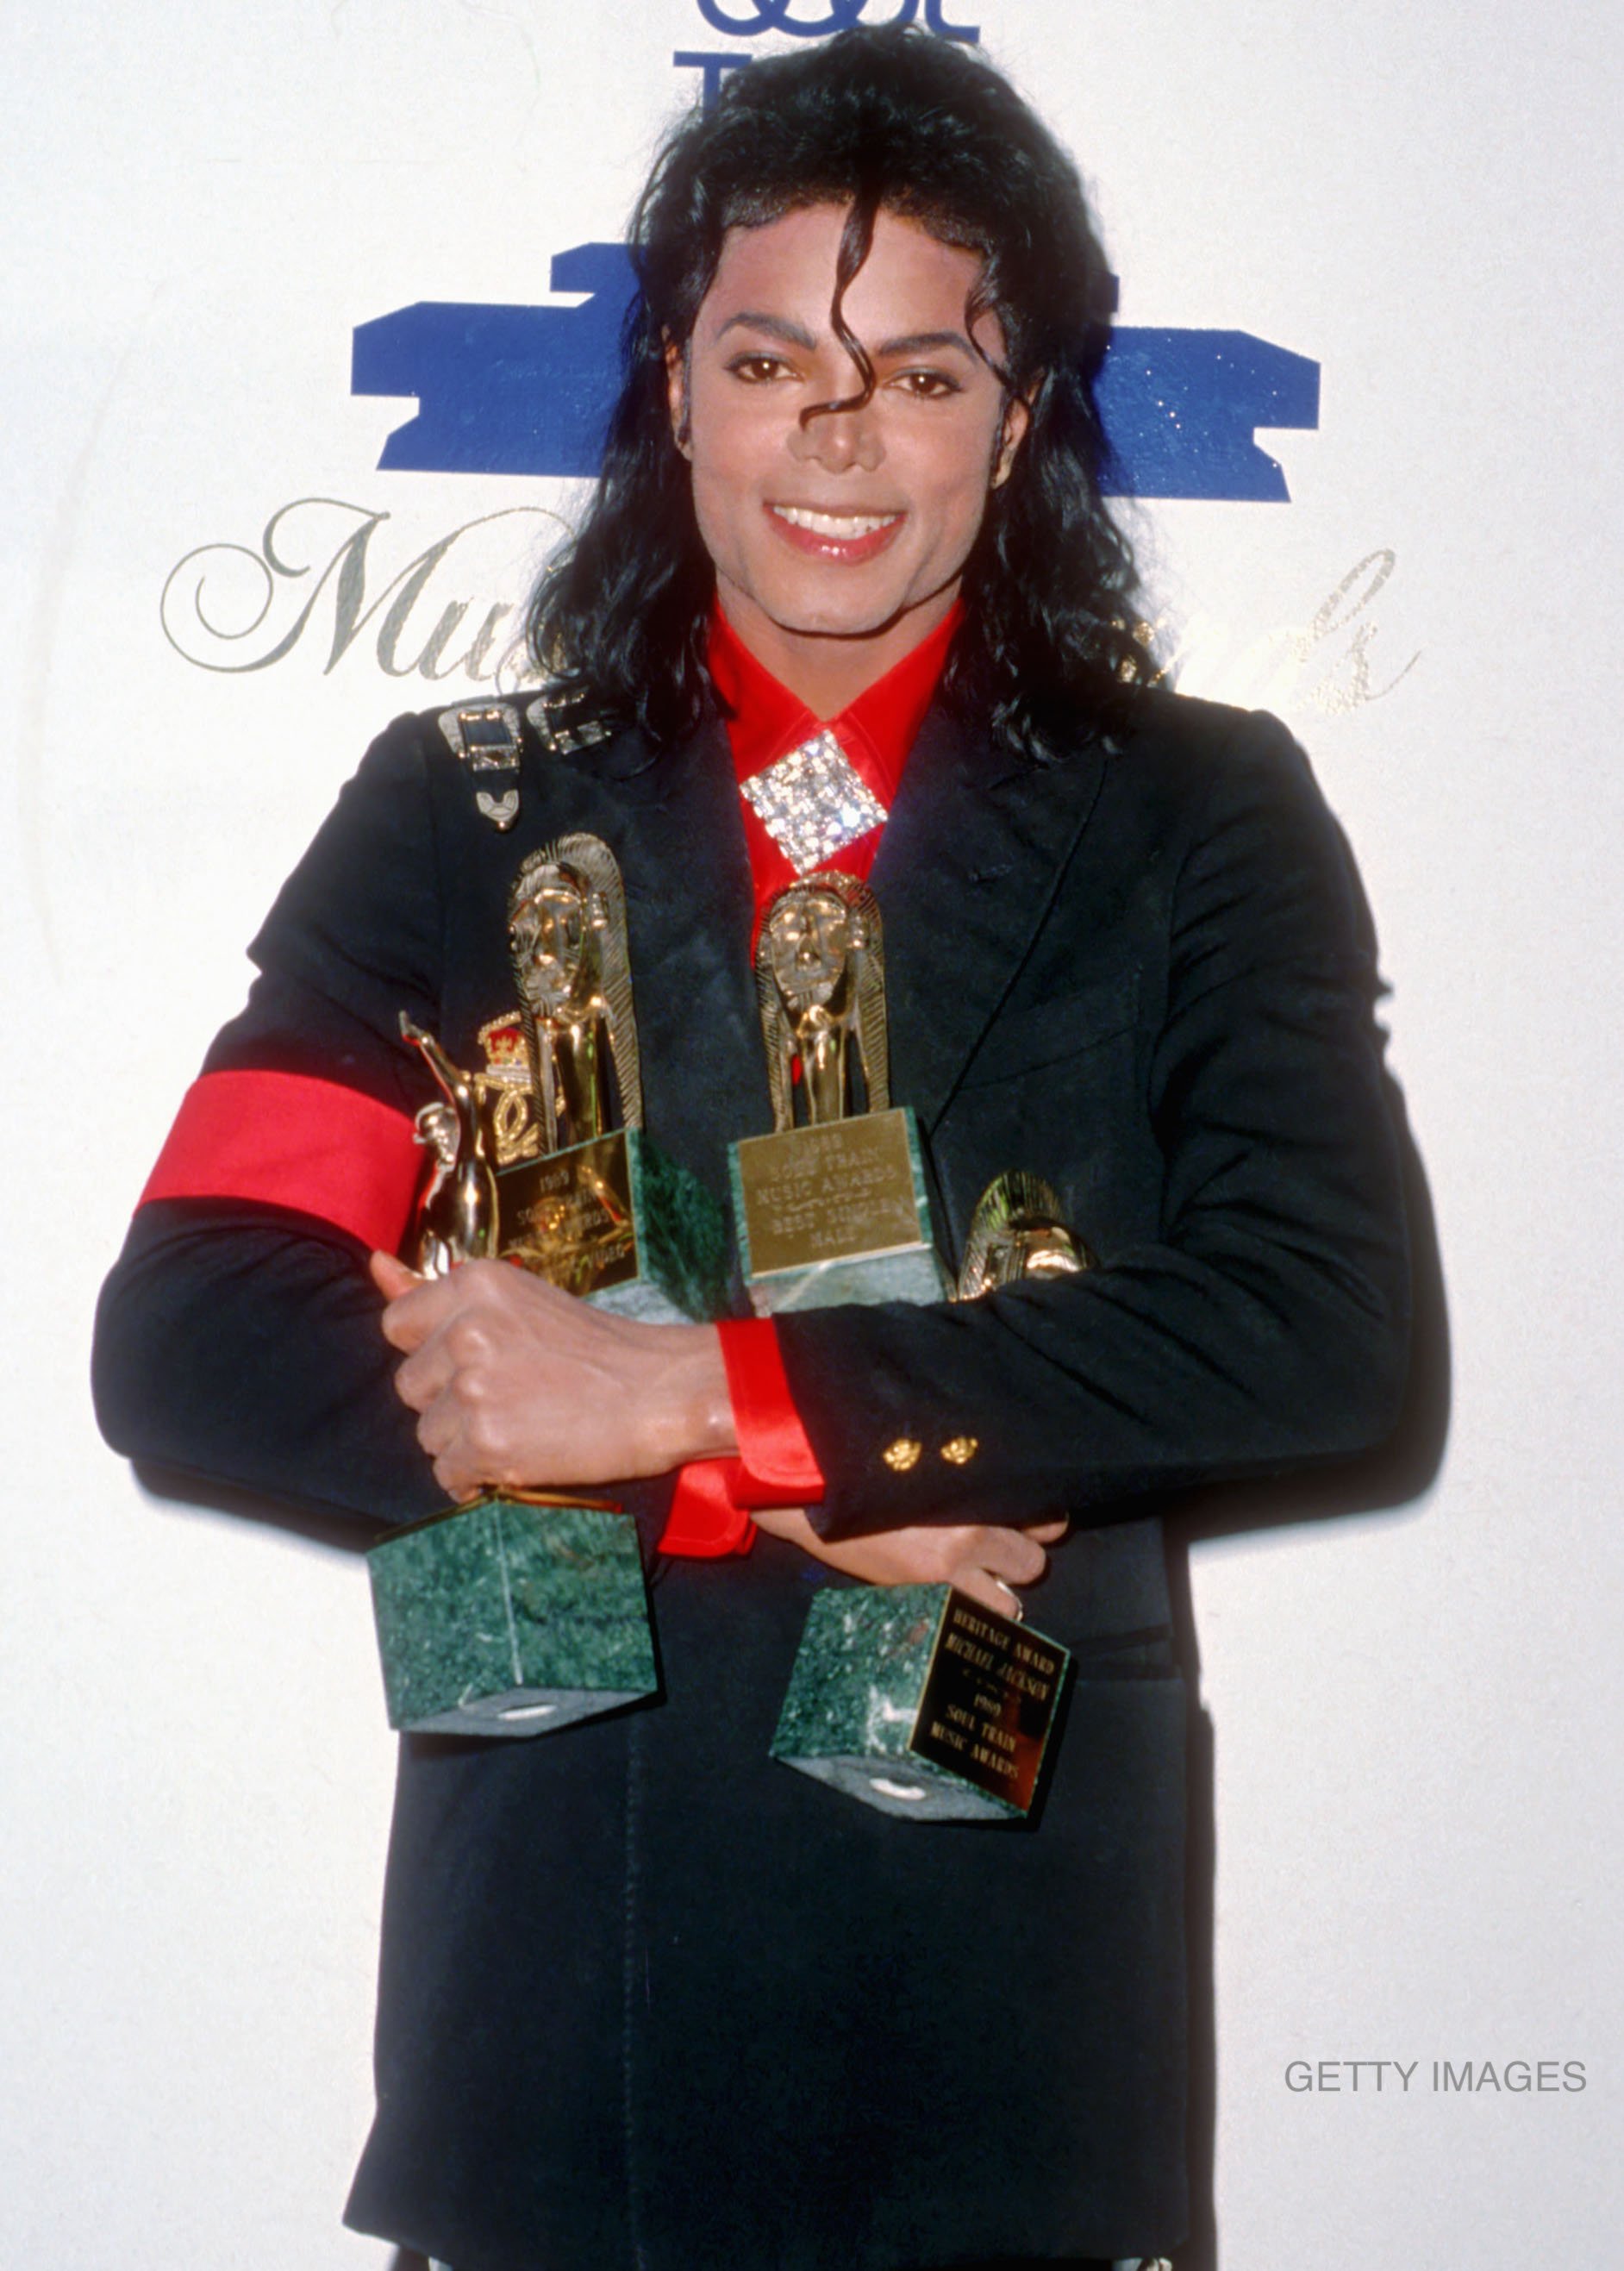 Michael Jackson backstage at the 3rd Annual Soul Train Awards held at the Shrine Auditorium in Los Angeles, CA, on April 13, 1989. Elizabeth Taylor presented Michael with the Heritage Award for Career Achievement and she dubbed him "the true king of pop, rock and soul." It was ultimately shortened to King of Pop and that is how Michael has been known ever since.